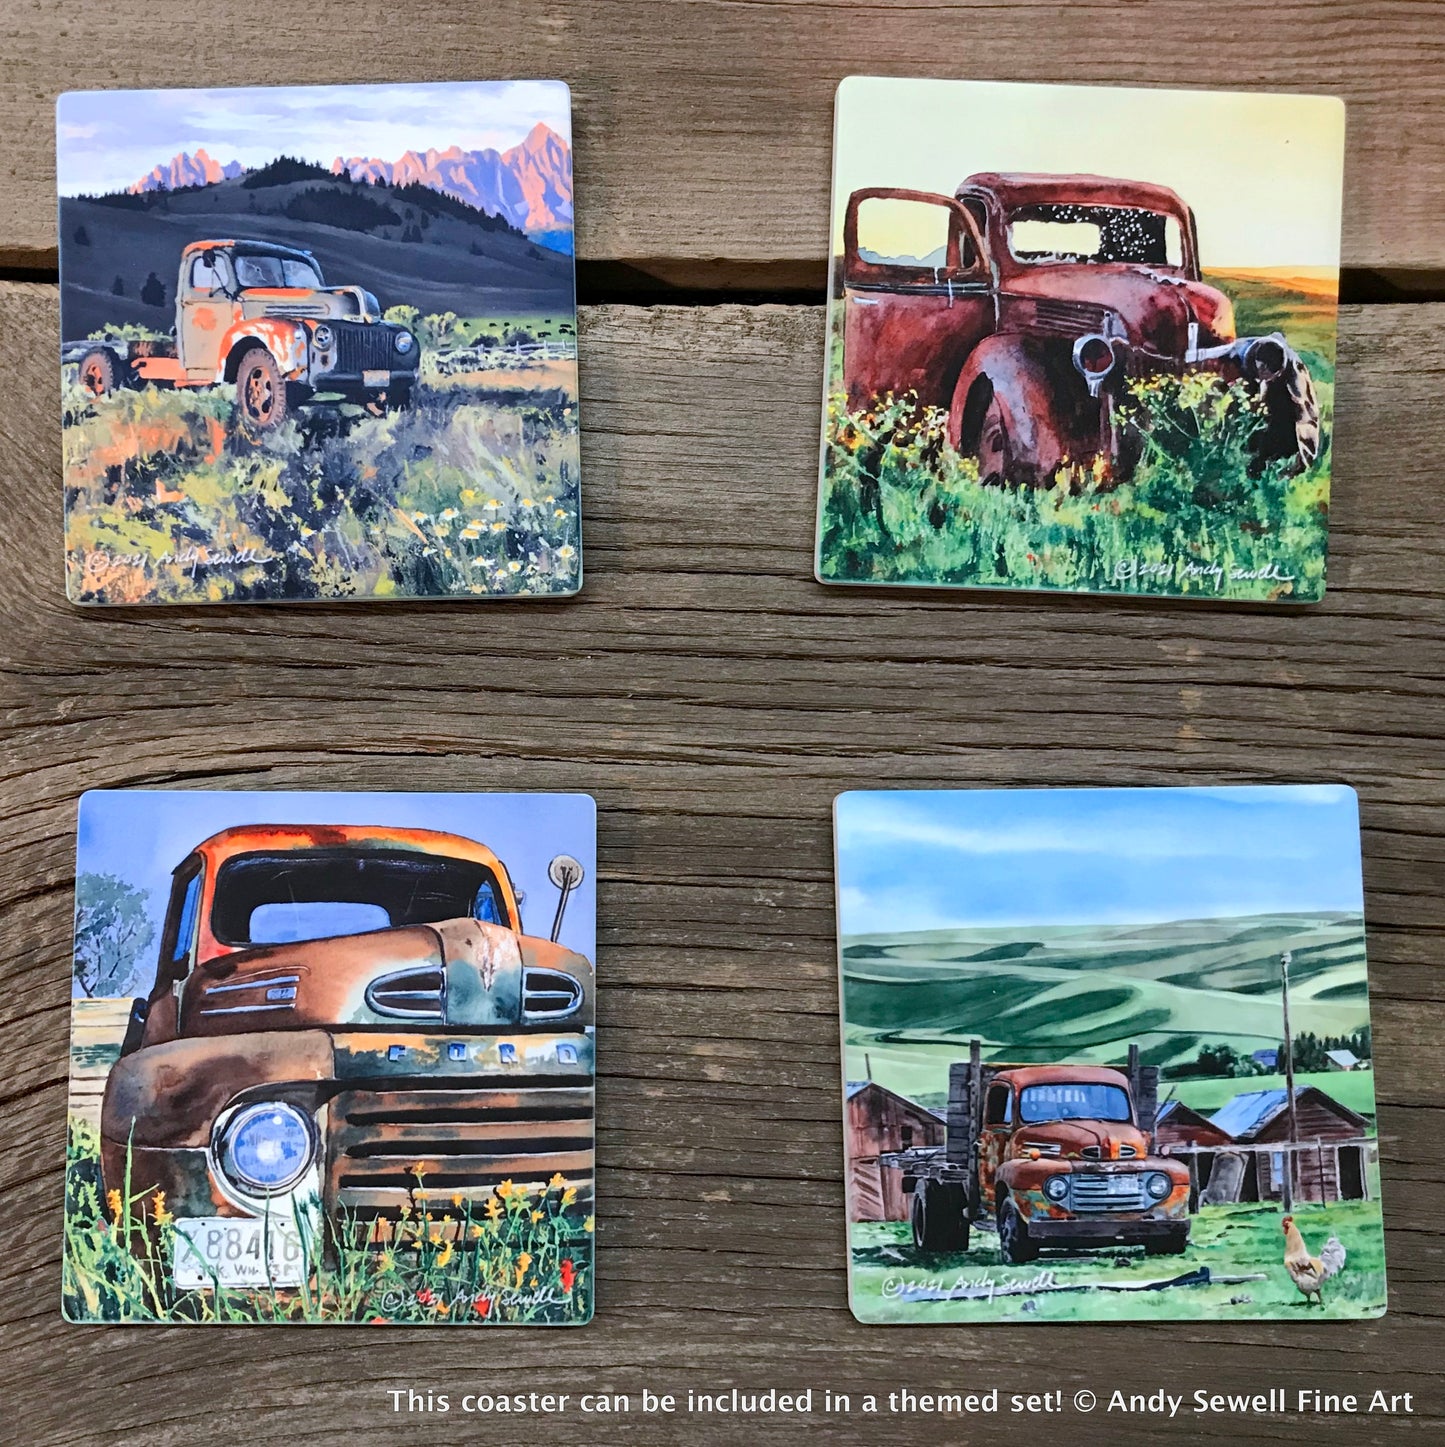 ASC361 “Ford in the Daisies“ ceramic coaster